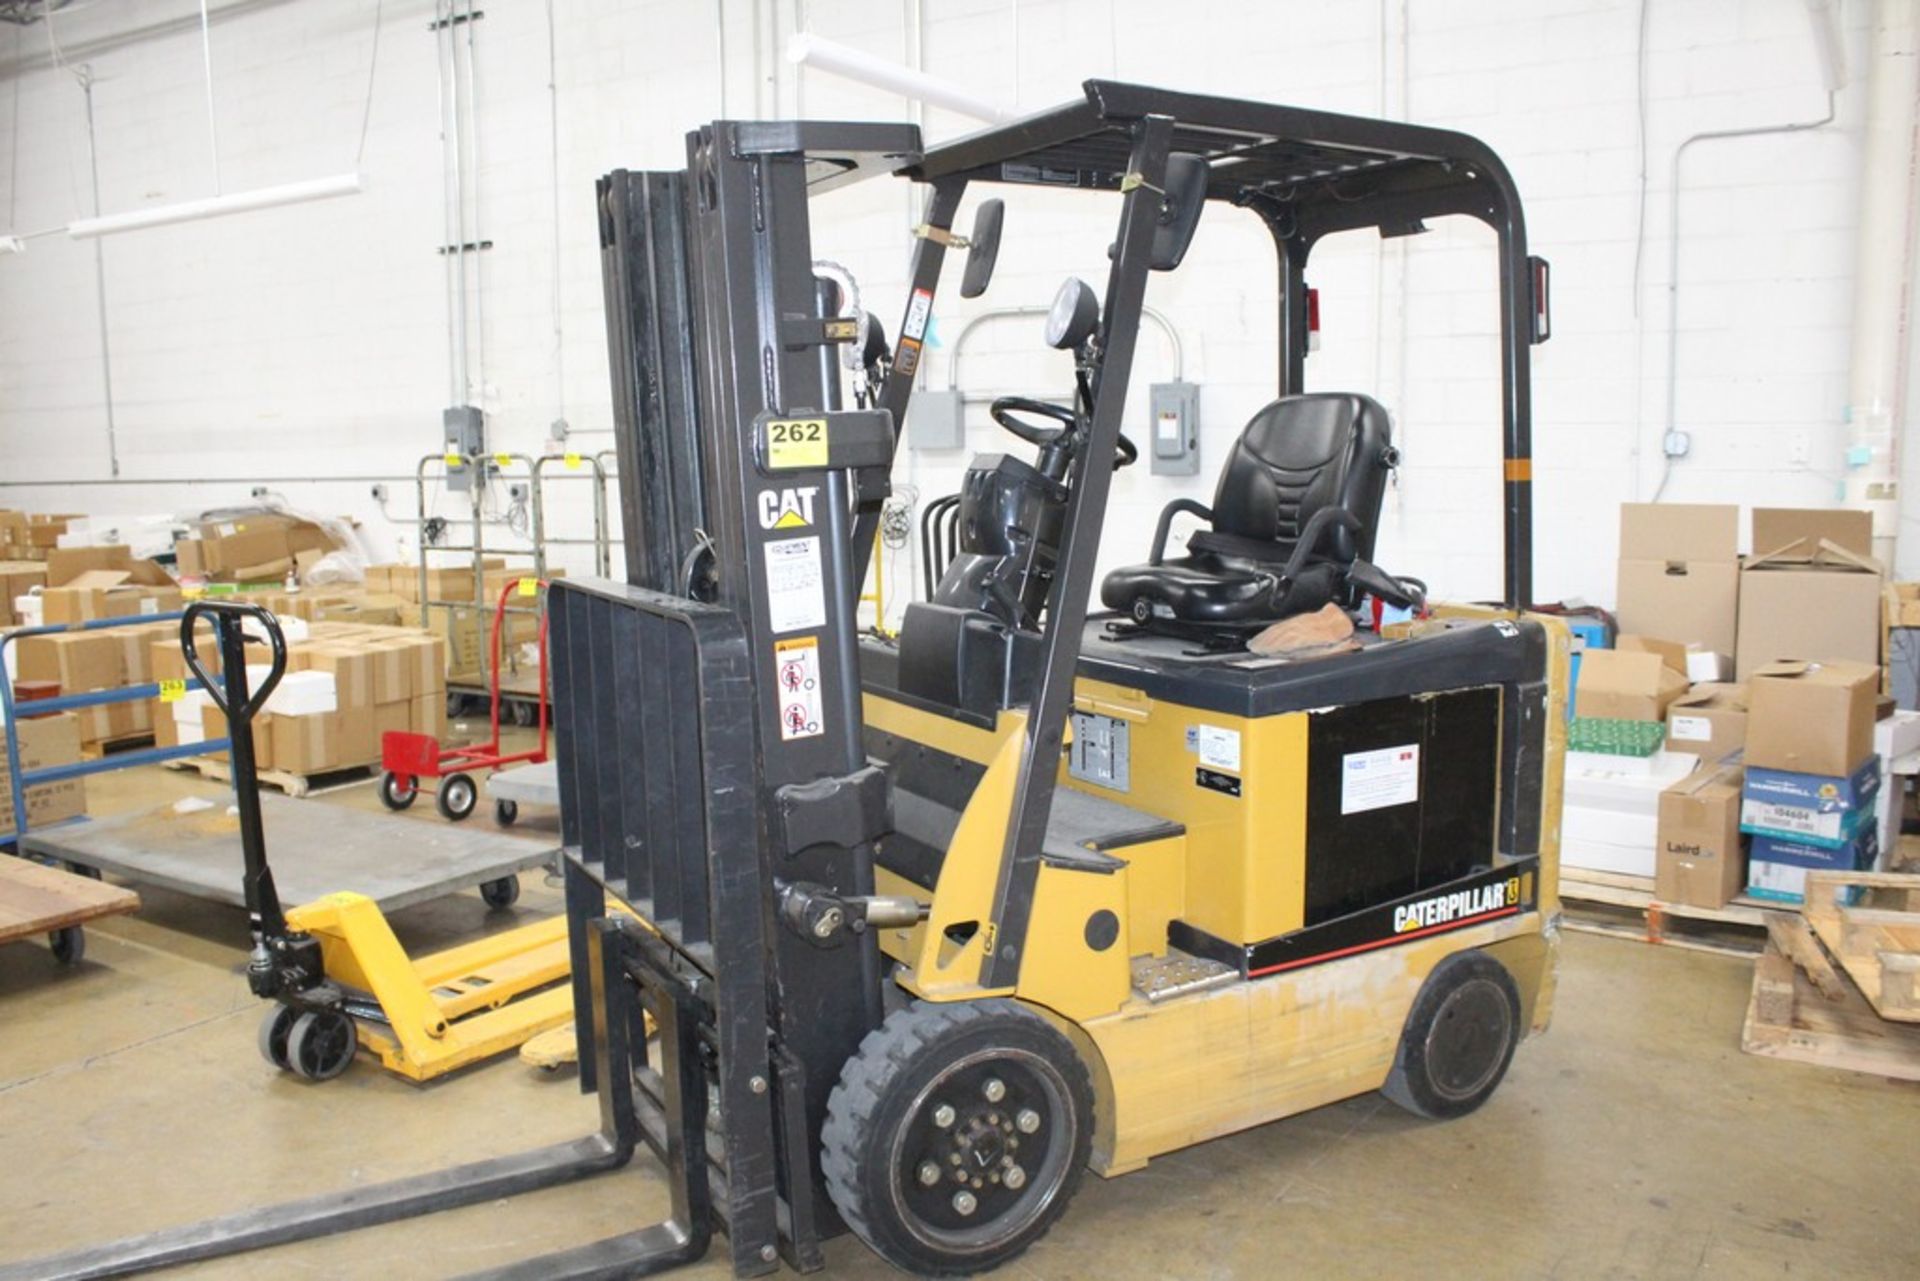 CATERPILLAR MODEL E5000 ELECTRIC FORKLIFT, 3,198 HOURS ON METER, LIFTING CAP. 4,500 LBS., 188" MAX